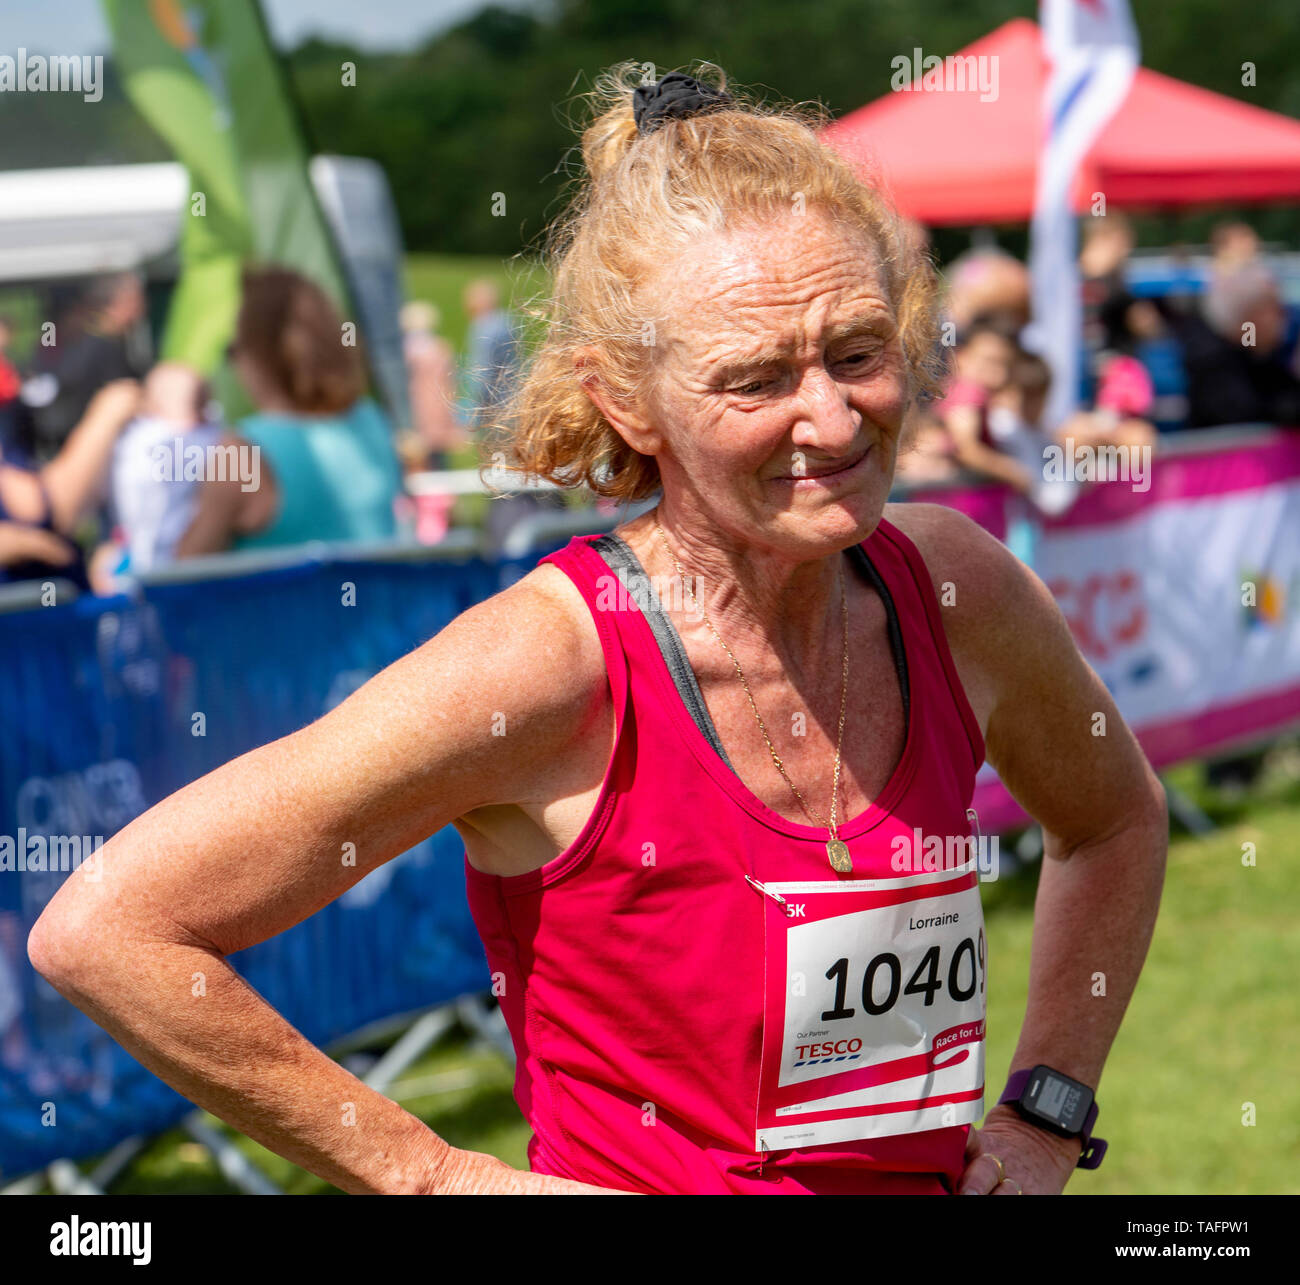 Brentwood Essex 25 mai 2019 Cancer UK Race for Life au Weald Country Park, Brentwood Essex Credit Ian Davidson/Alamy Live News Banque D'Images